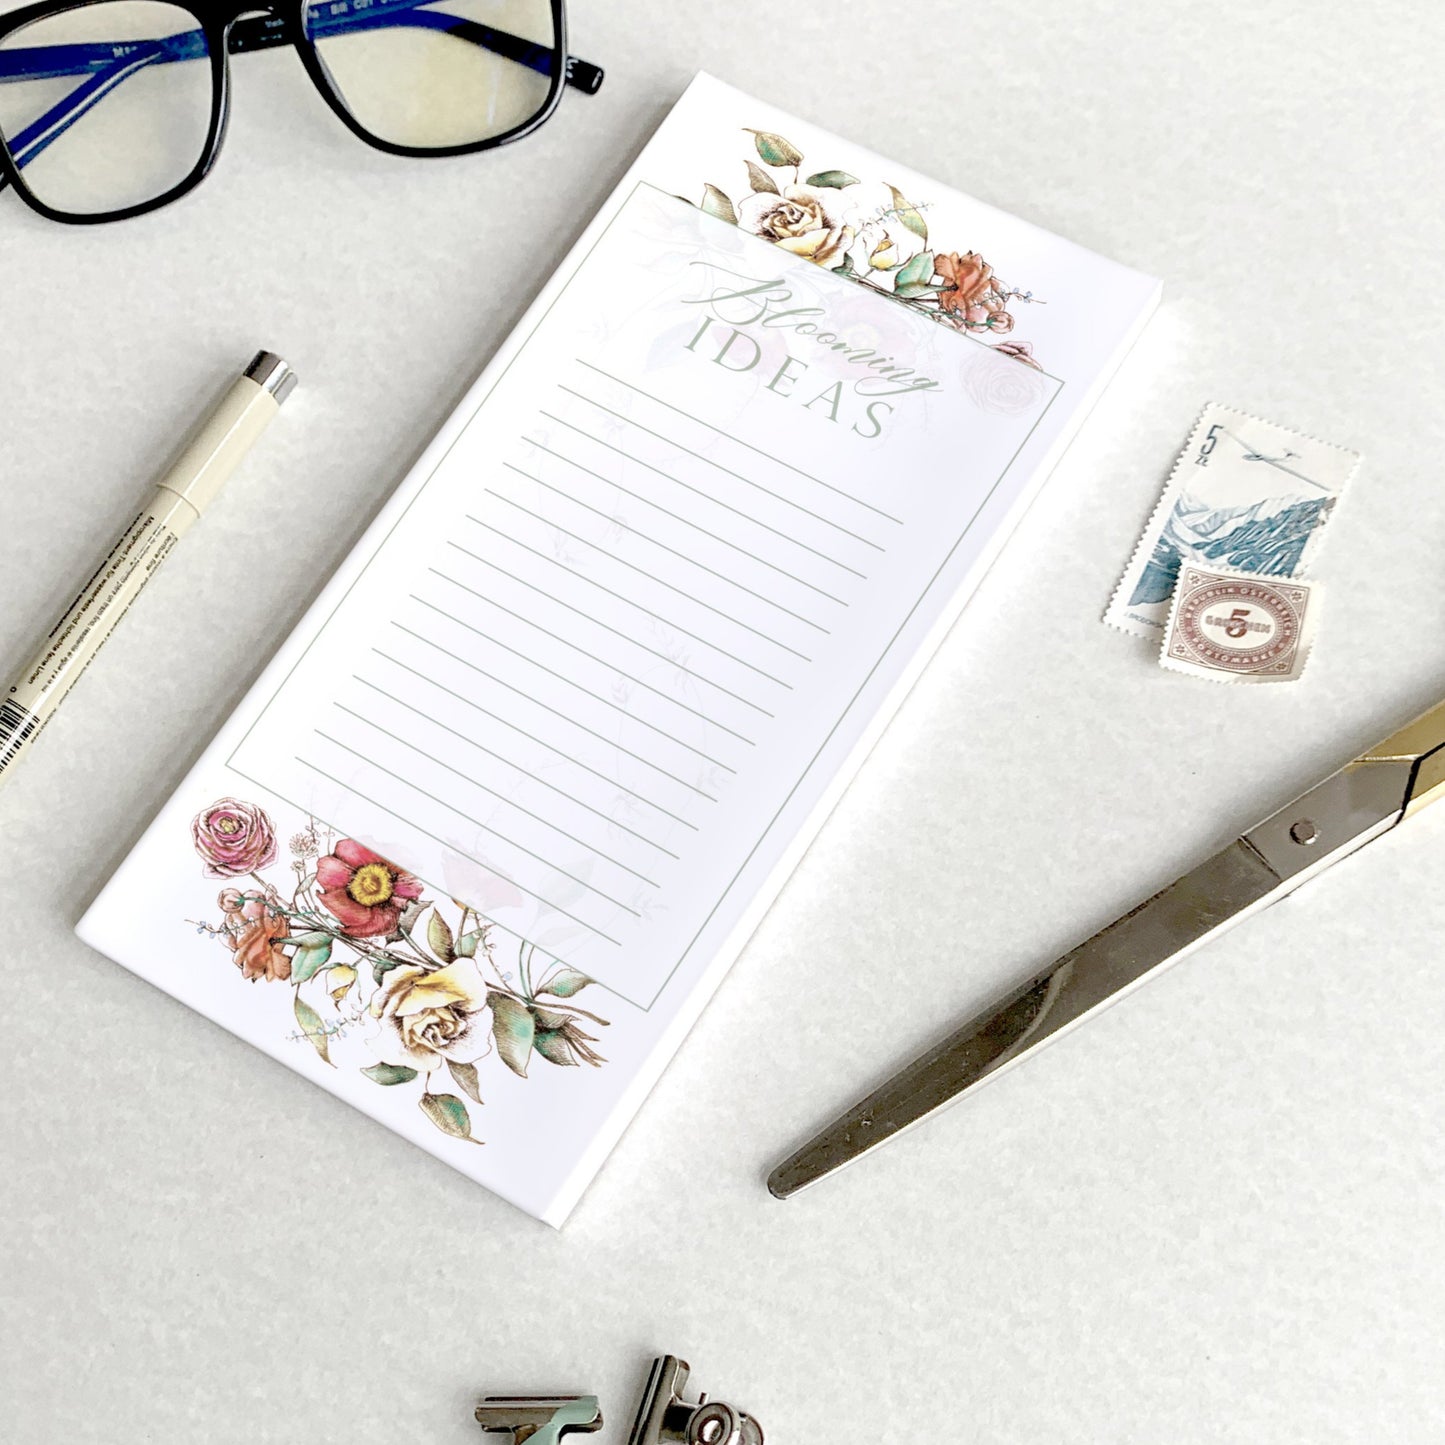 3.5 by 8.5 notepad with lined sheets with florals that says "Blooming ideas" by Rust Belt Love